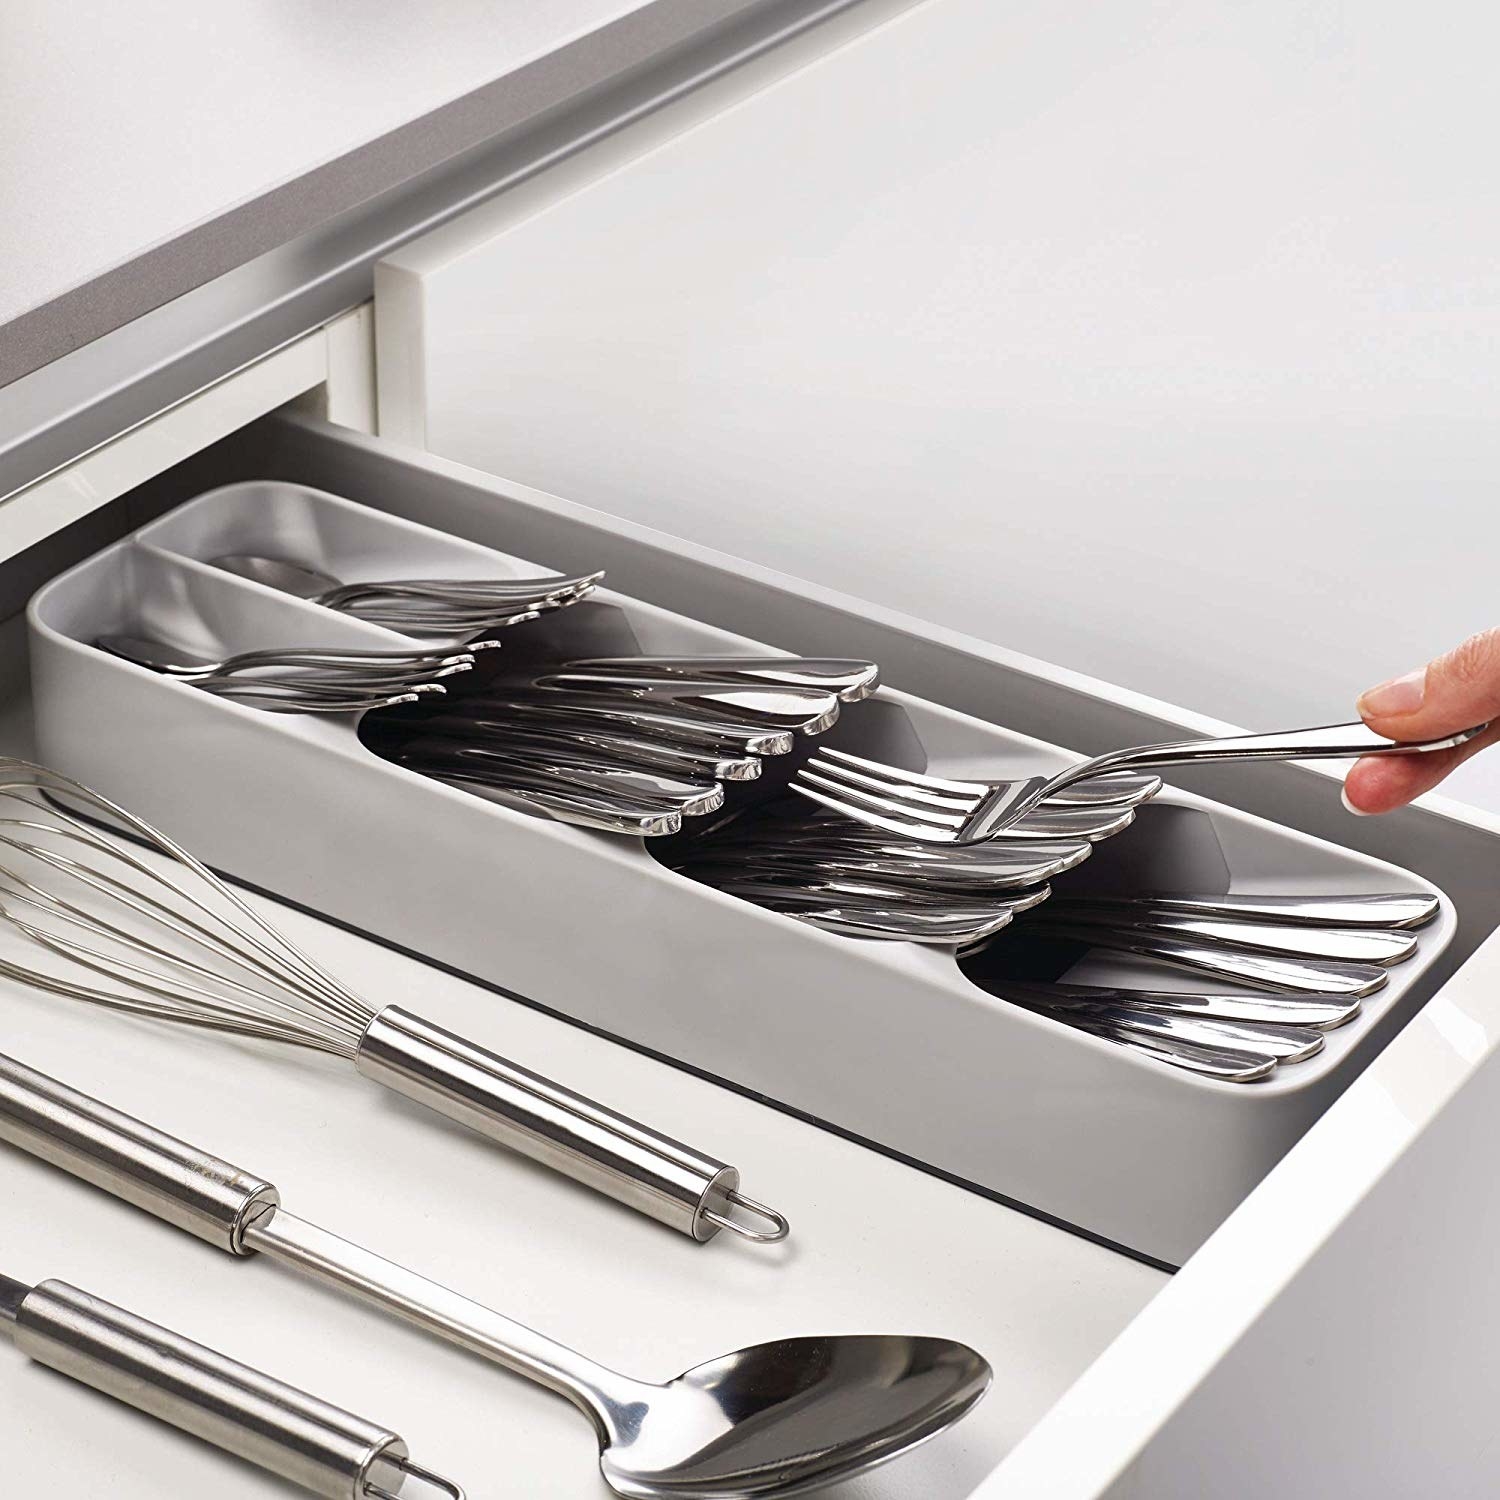 slim silver organizer in drawer with cutlery slid into it 